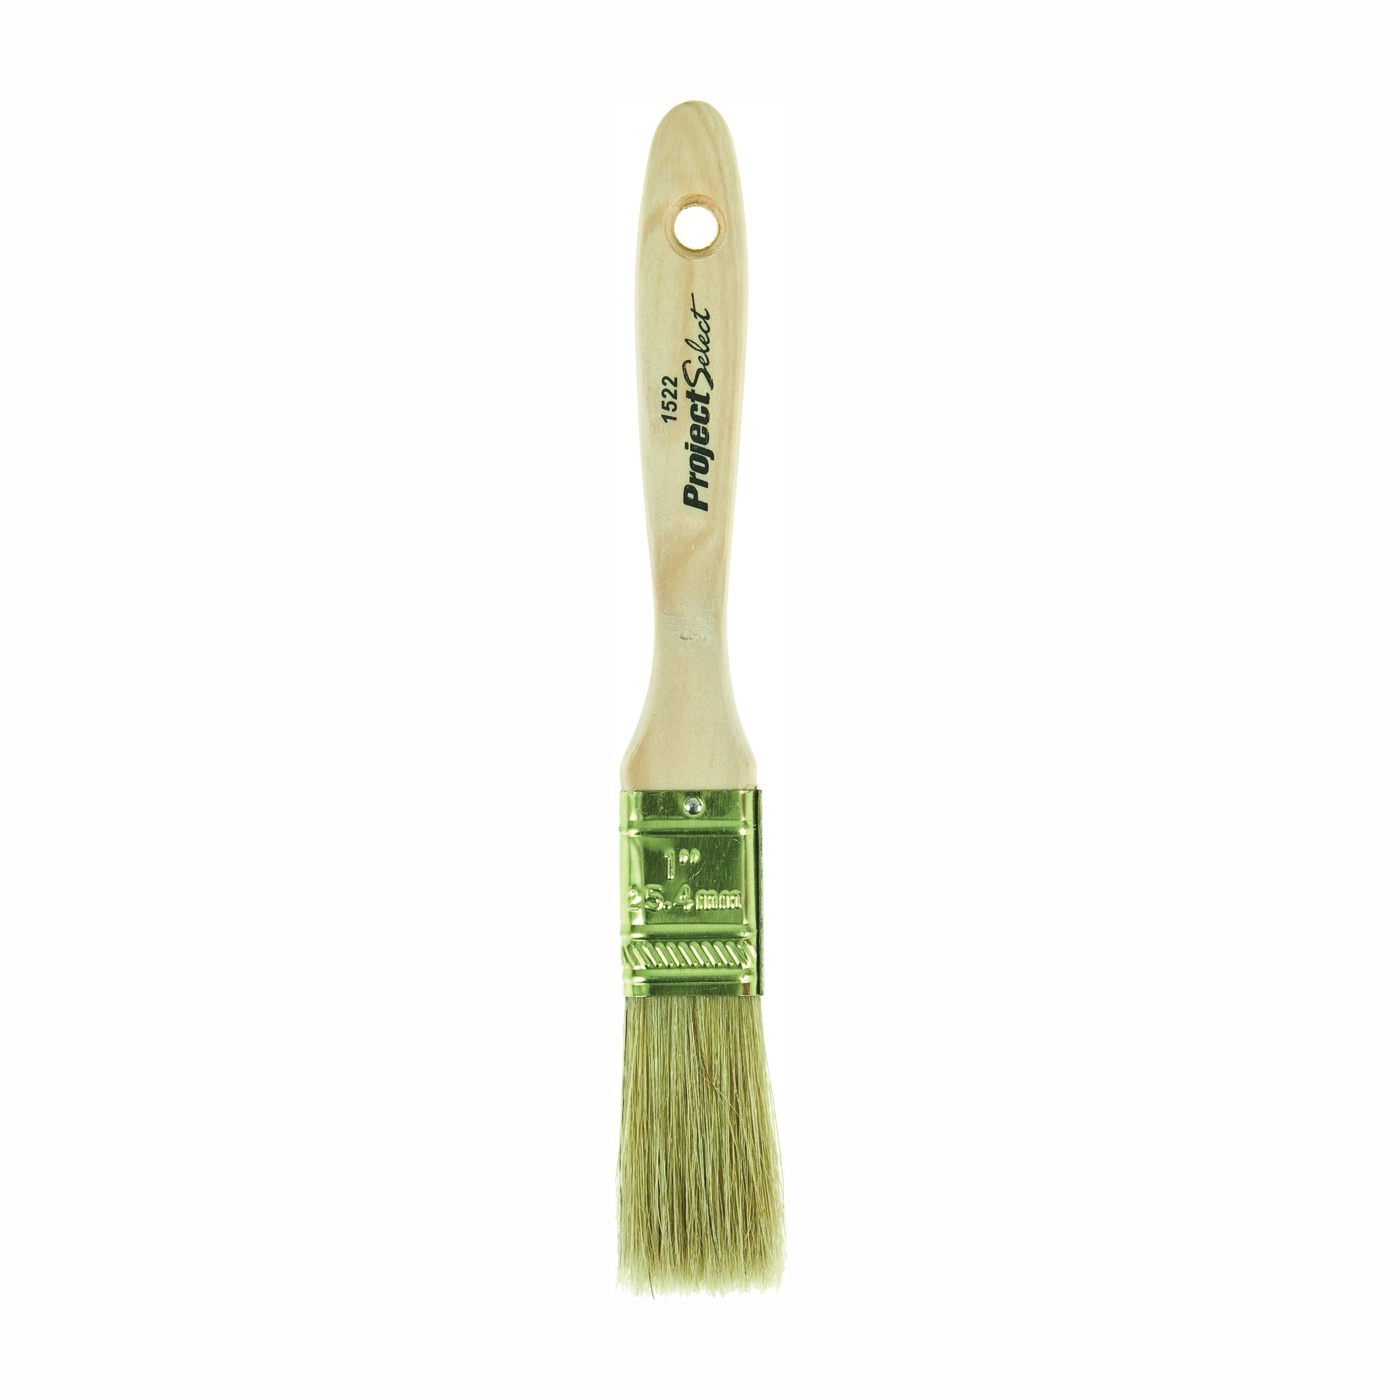 1522-2 Paint Brush, 2 in W, 2-3/4 in L Bristle, China Bristle, Beaver Tail Handle